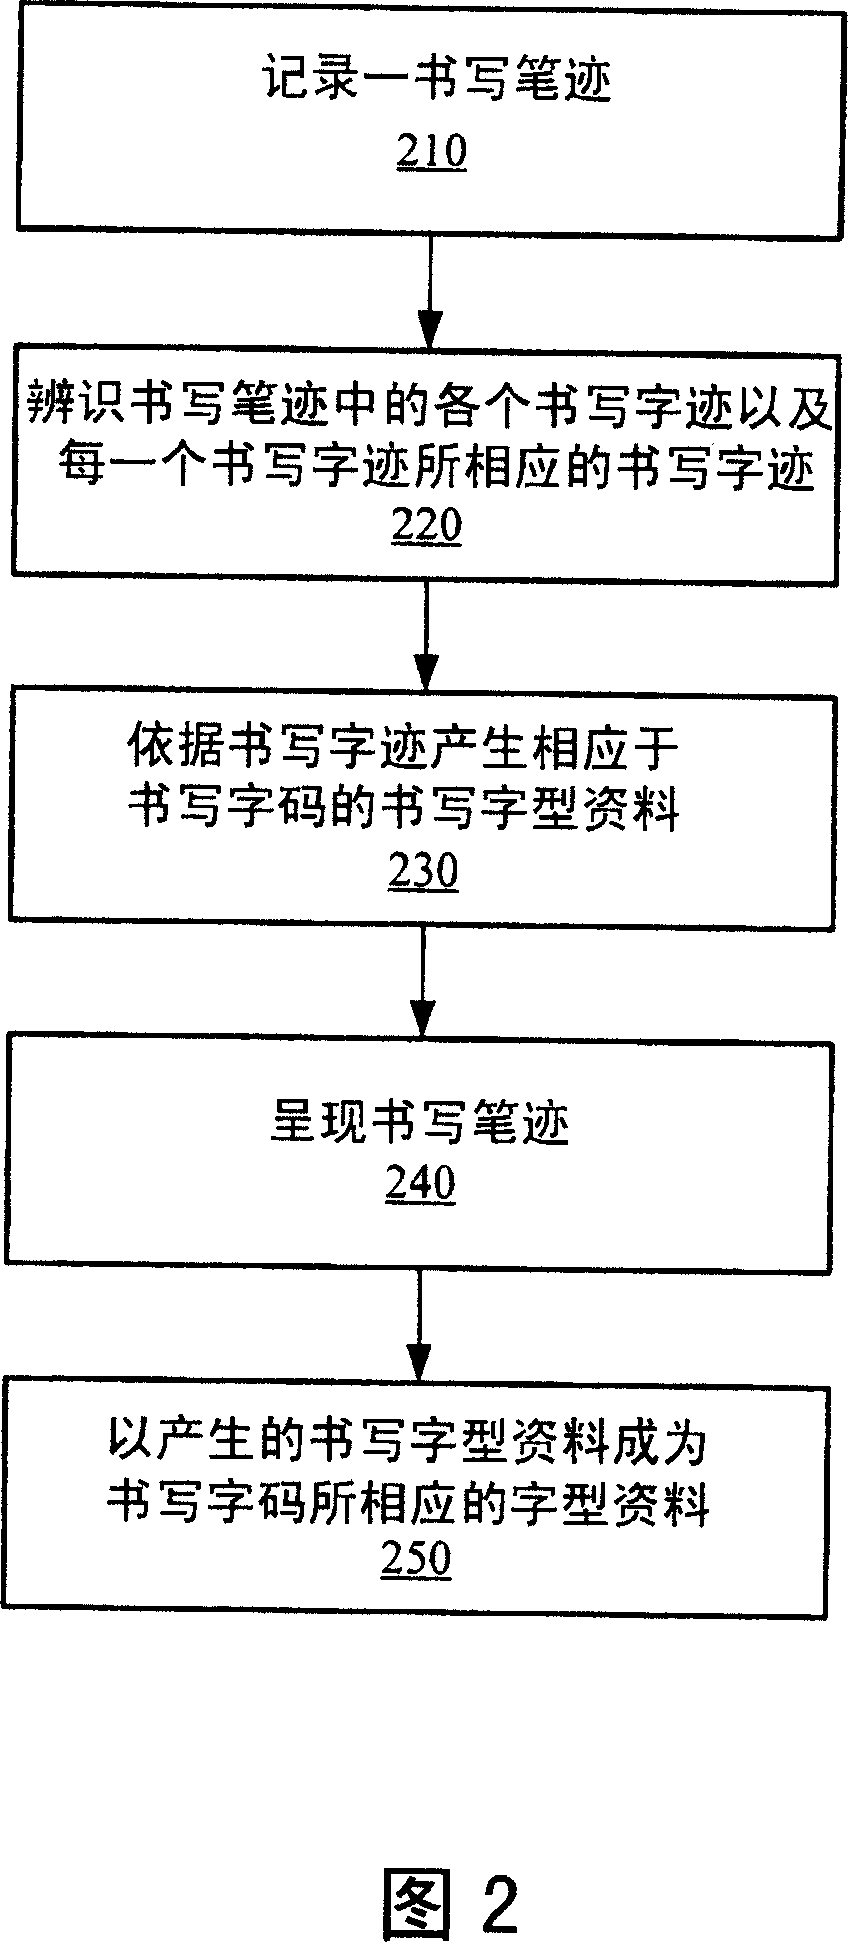 System and method for writing and making word